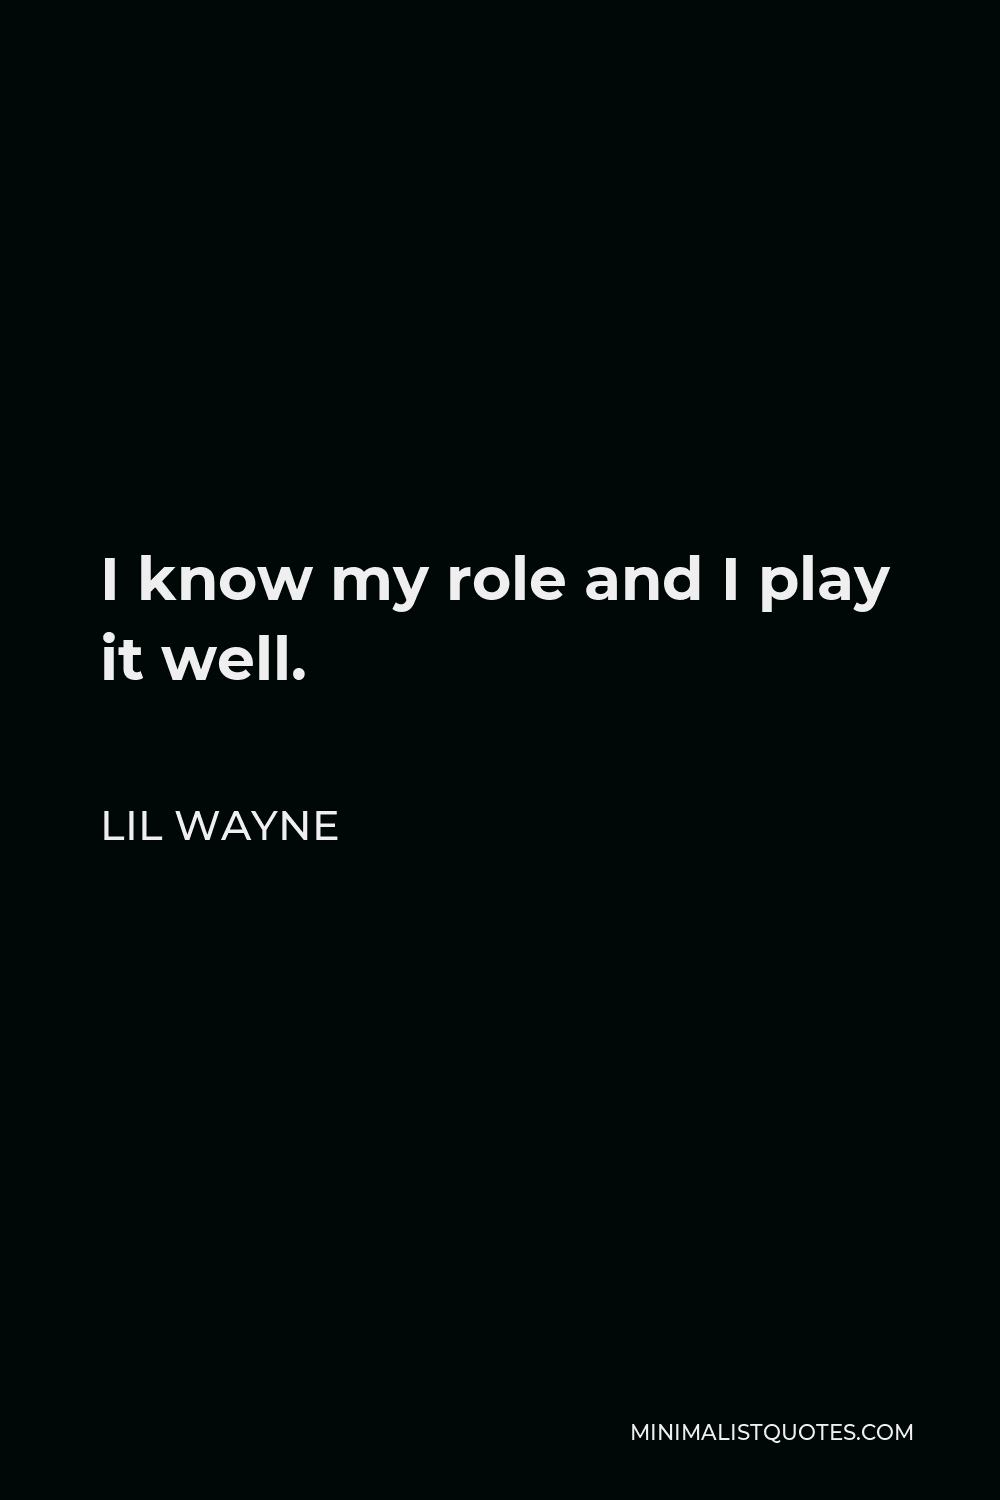 Lil Wayne Quote - I know my role and I play it well.